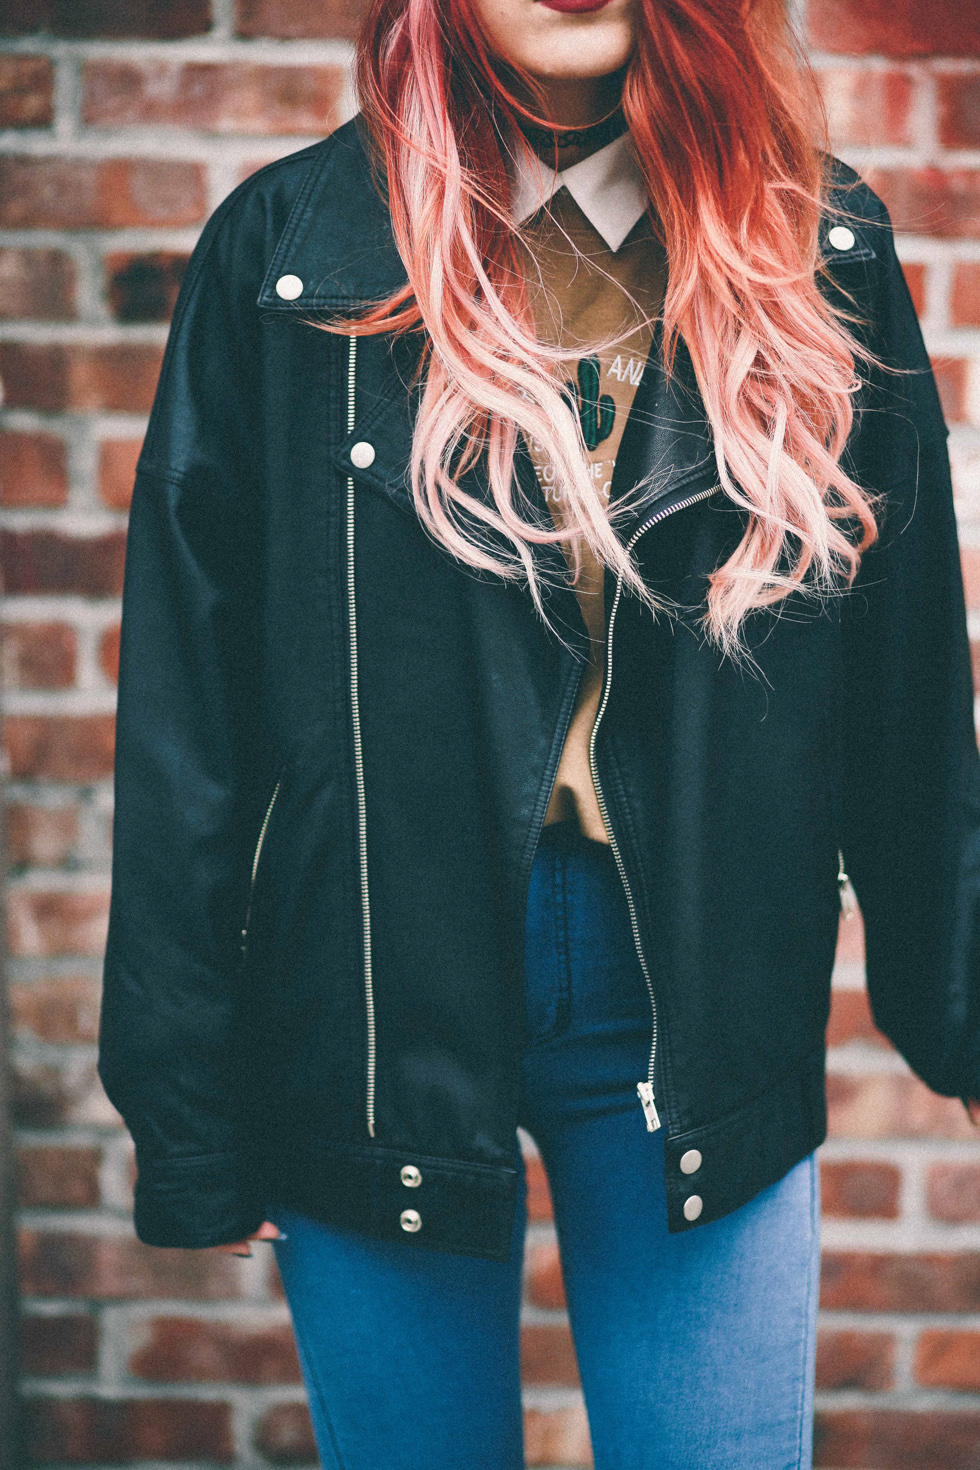 Oversized motorcycle jacket and blue jeans